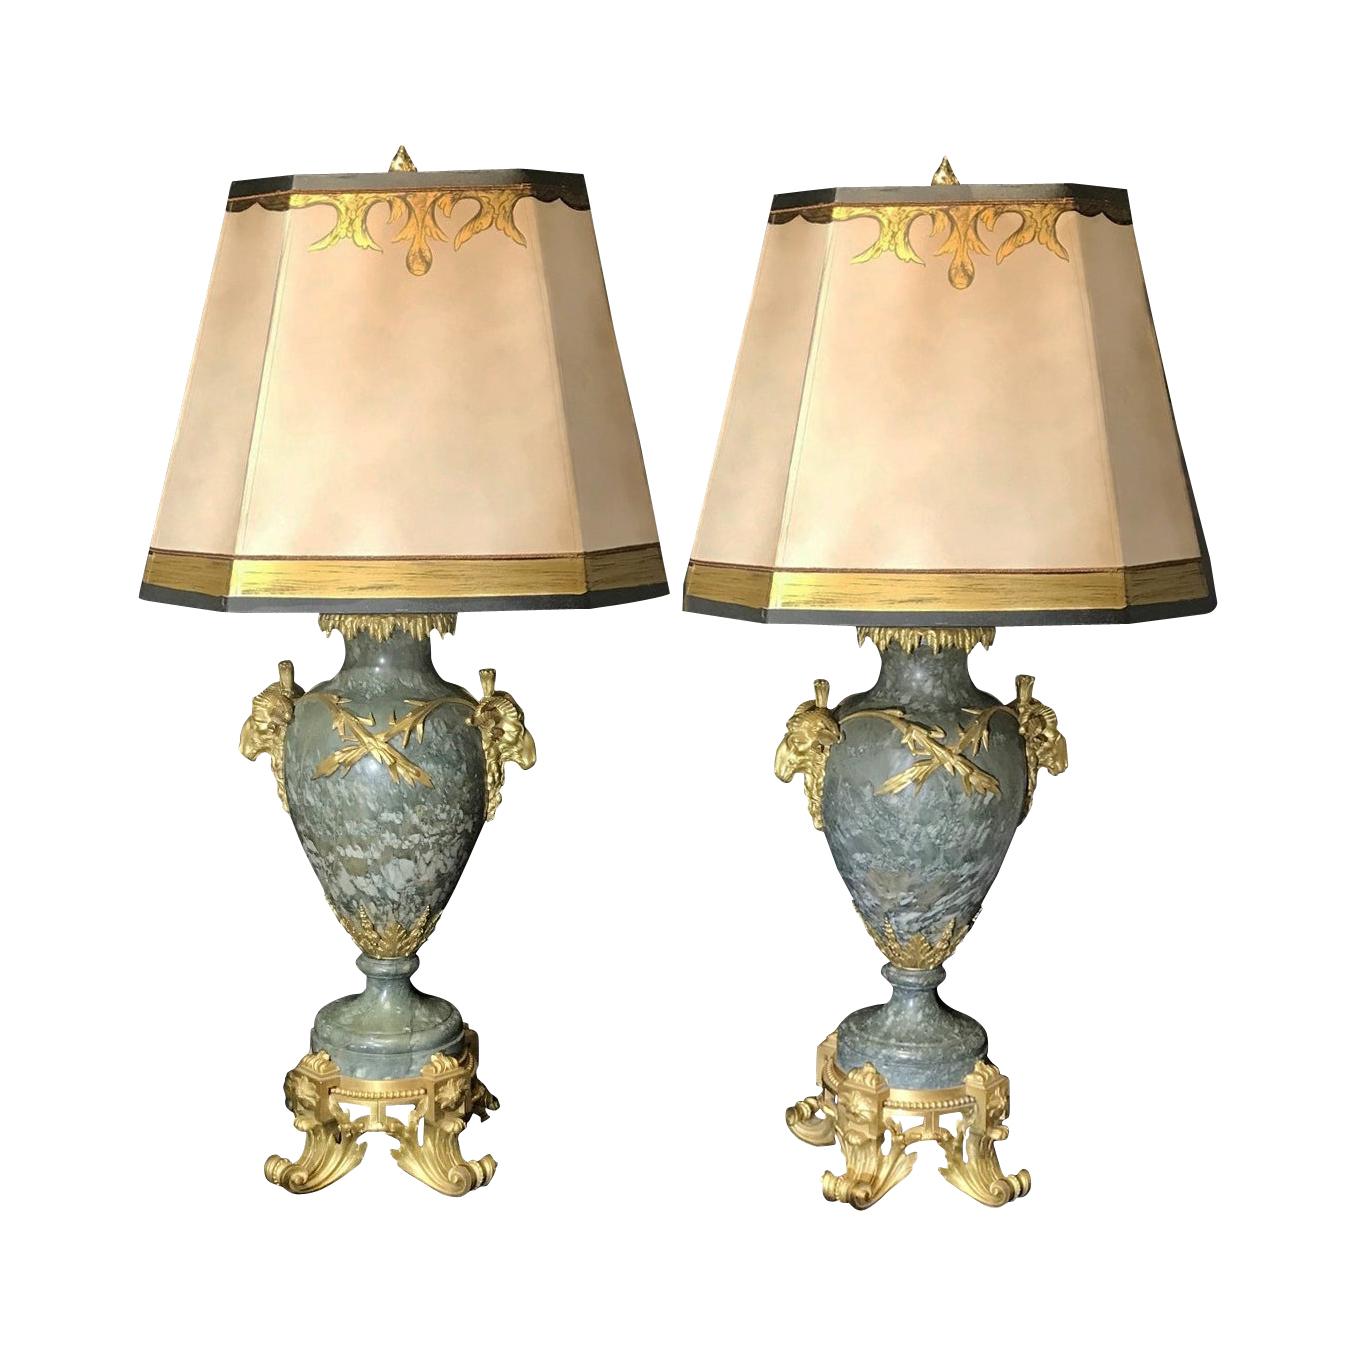 Pair of French Ormolu Mounted Marble Urns, Signed GJL